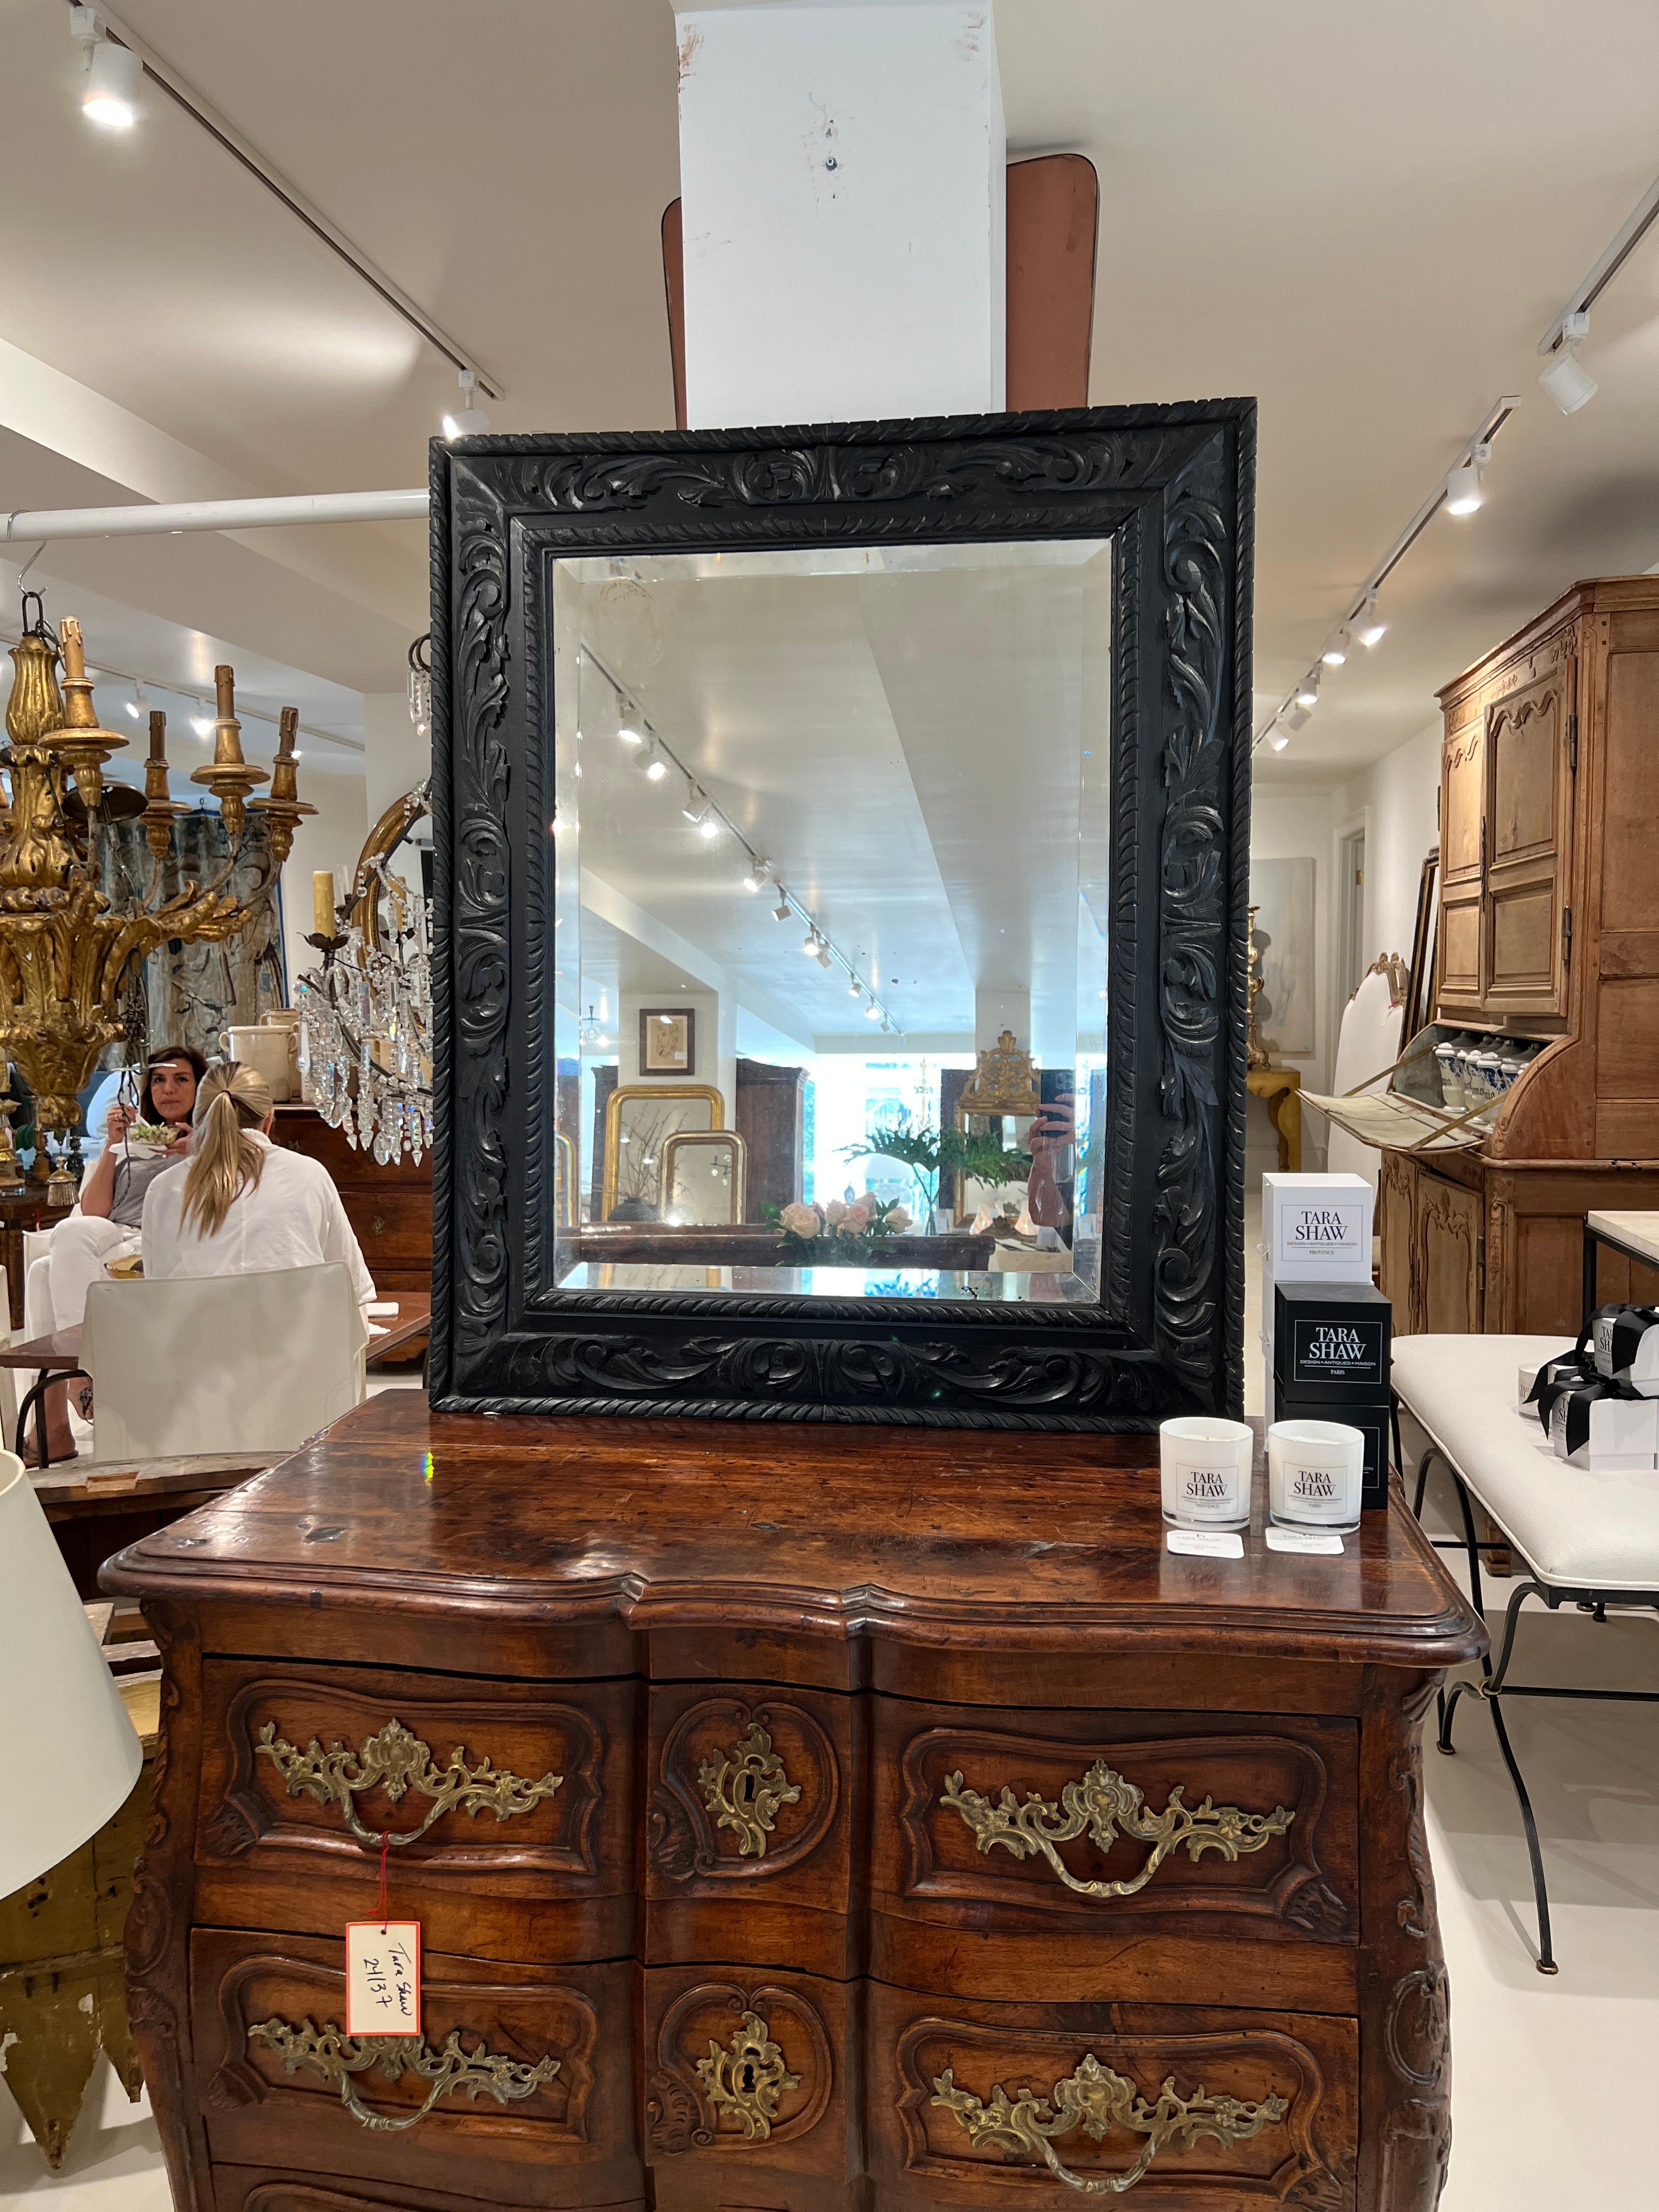 Very wide, heavily carved frame with a reversed cove toward the back.  Beautiful beveled mirror in original glass.  The impression of what appears to be a makers mark is visible in the upper left corner of the mirror.